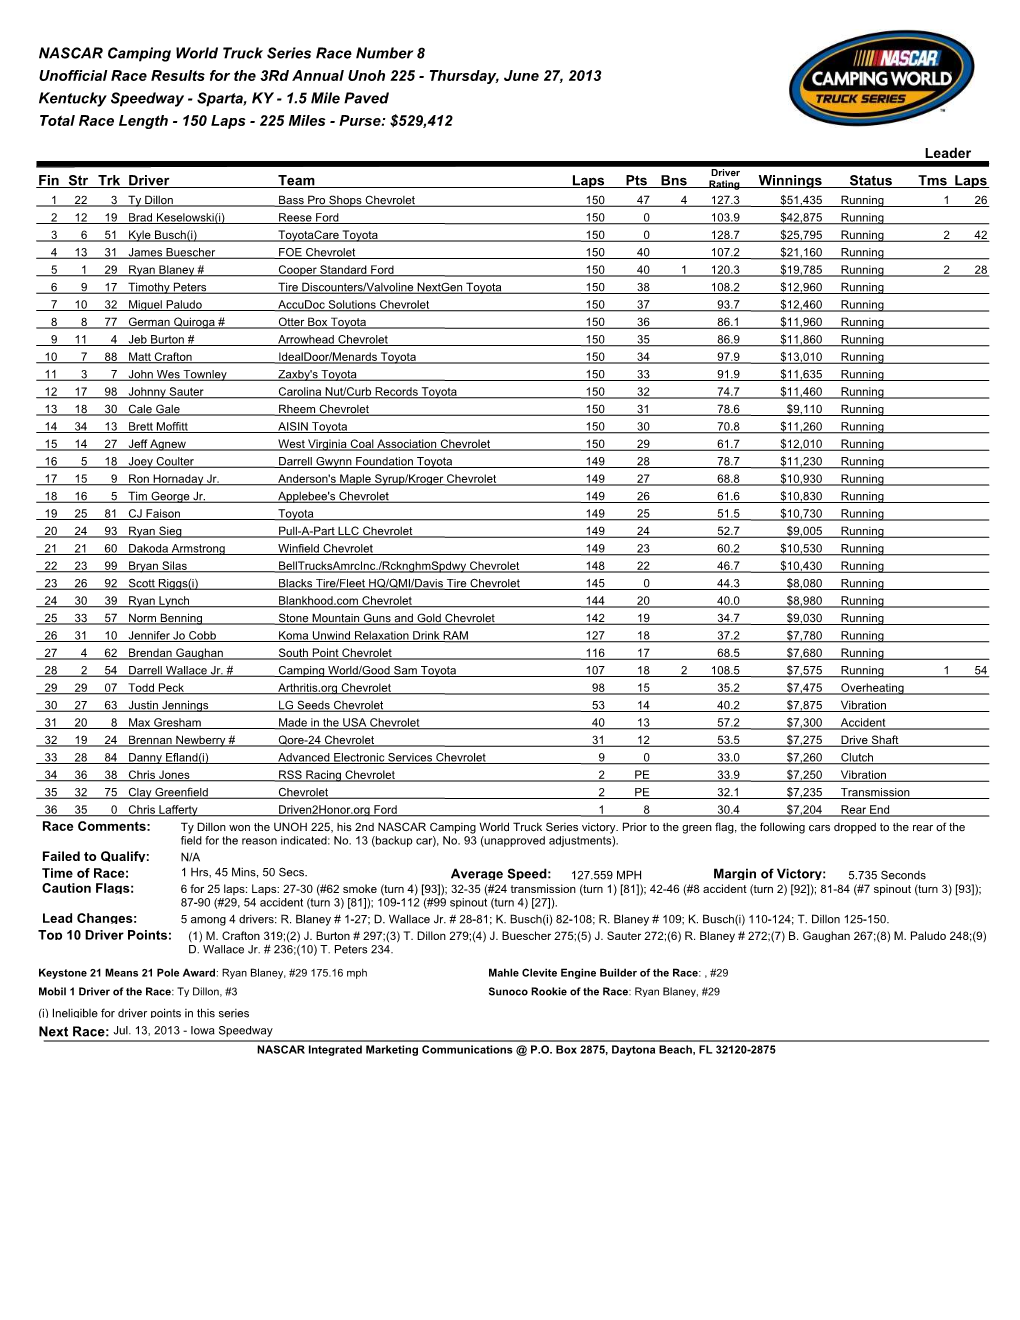 NASCAR Camping World Truck Series Race Number 8 Unofficial